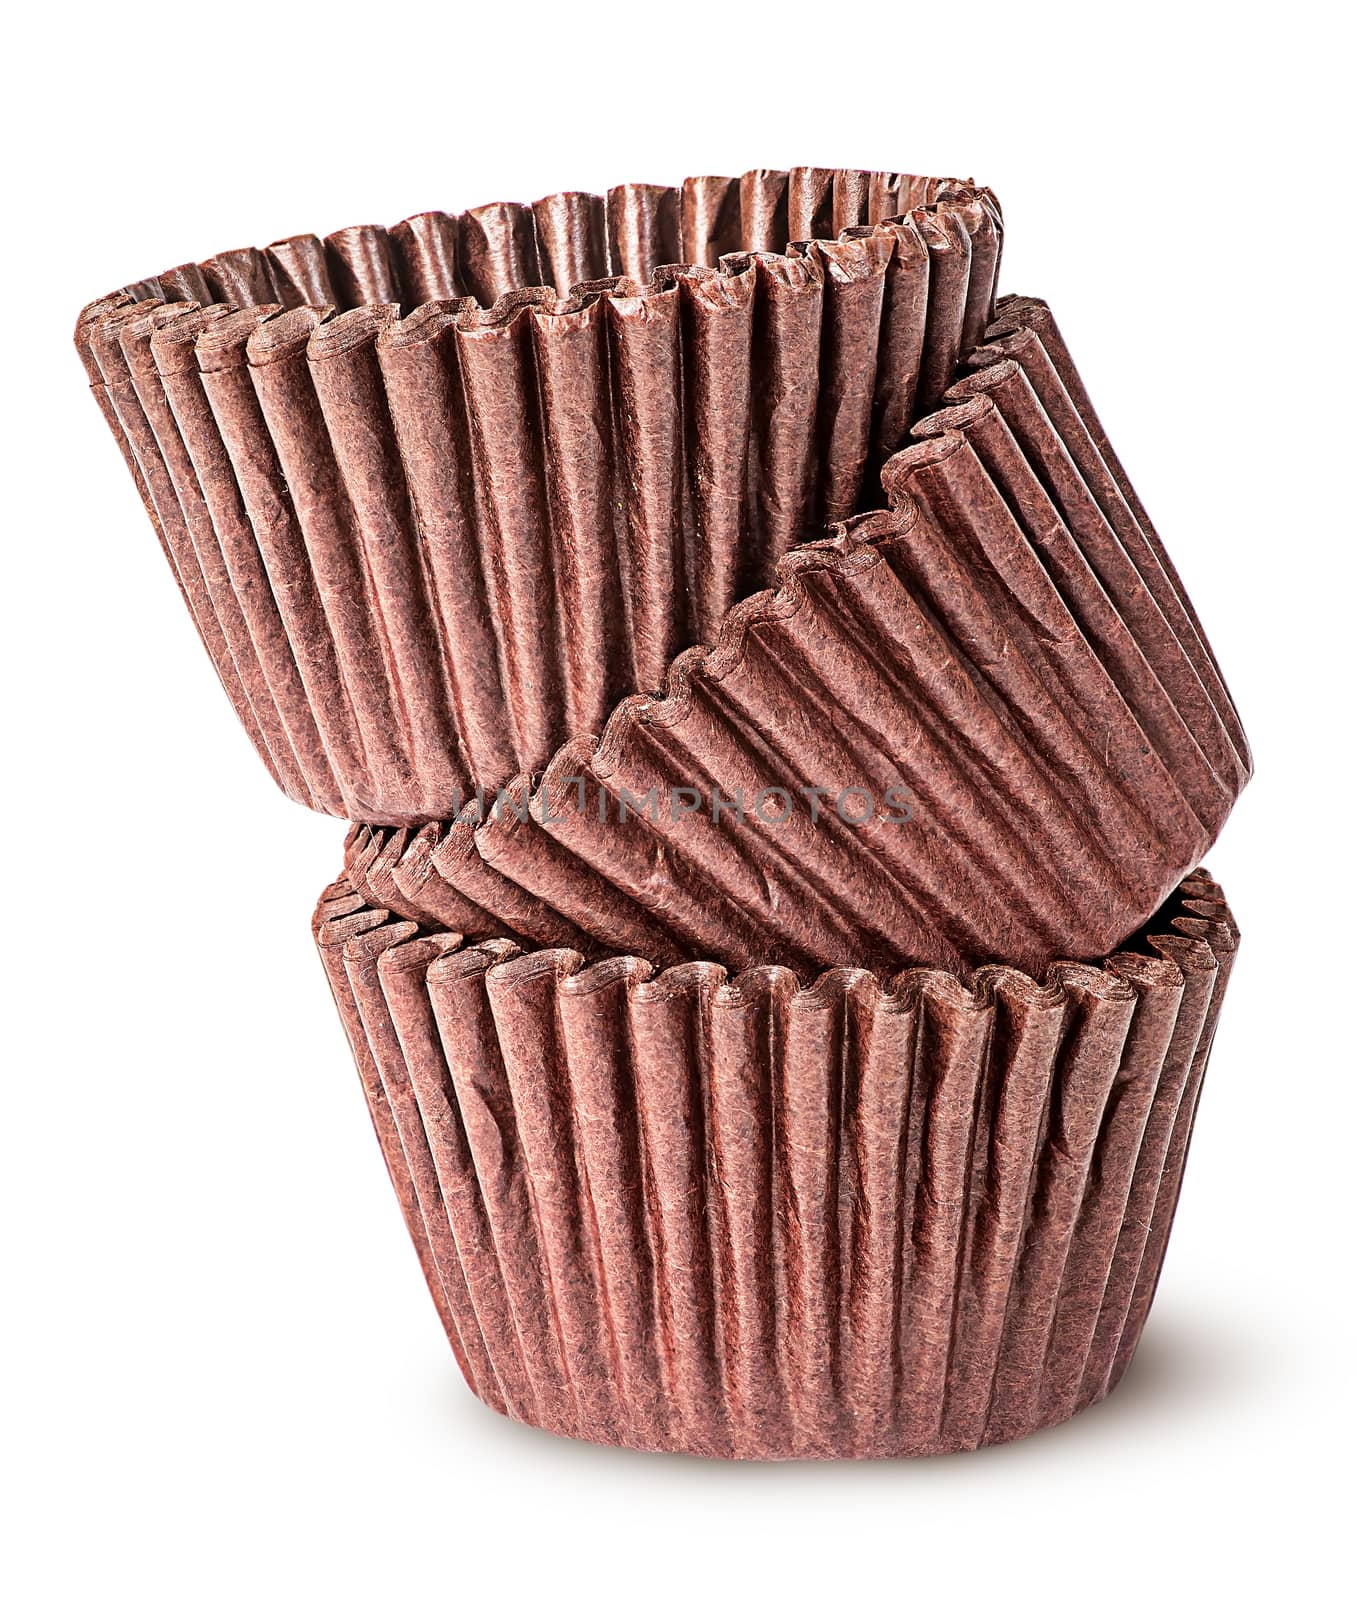 Heap of brown paper cups for baking muffins isolated on white background